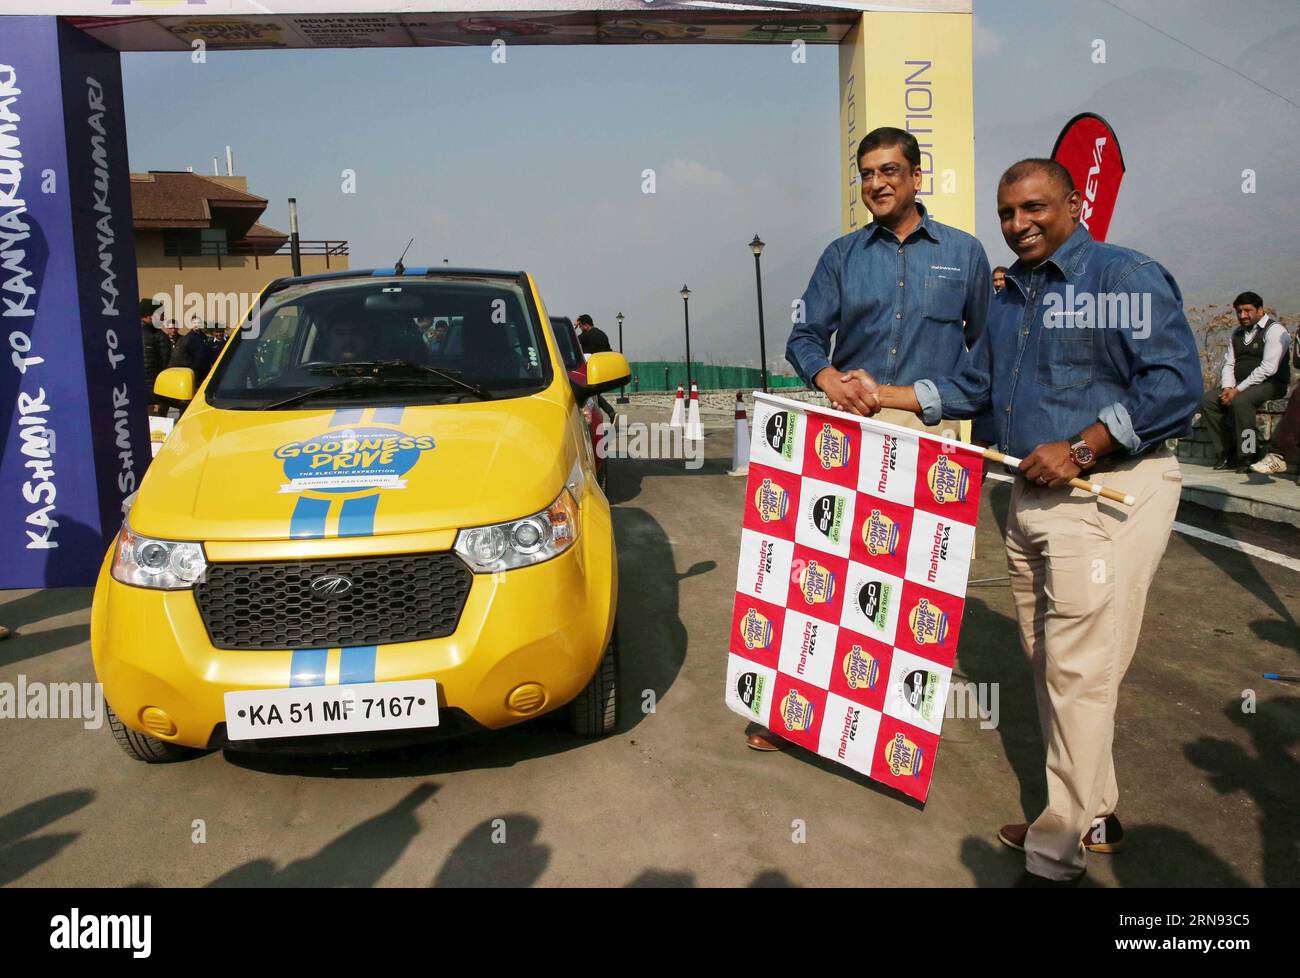 SRINAGAR,  Aravinda De Silva (R), former cricketer of Sri Lanka, flags off India s first all-electric car expedition in Srinagar, summer capital of Indian-controlled Kashmir, Nov. 16, 2015. The first all-electric car expedition organized by Mahindra Reva Electric Vehicles Pvt Limited from Kashmir to Kanyakumari will cover a distance of over 5000 kilometers across 52 locations over a month. ) KASHMIR-SRINAGAR-ELECTRIC CAR EXPEDITION JavedxDar PUBLICATIONxNOTxINxCHN   Srinagar  de Silva r Former Cricketer of Sri Lanka Flags off India S First All Electric Car Expedition in Srinagar Summer Capital Stock Photo